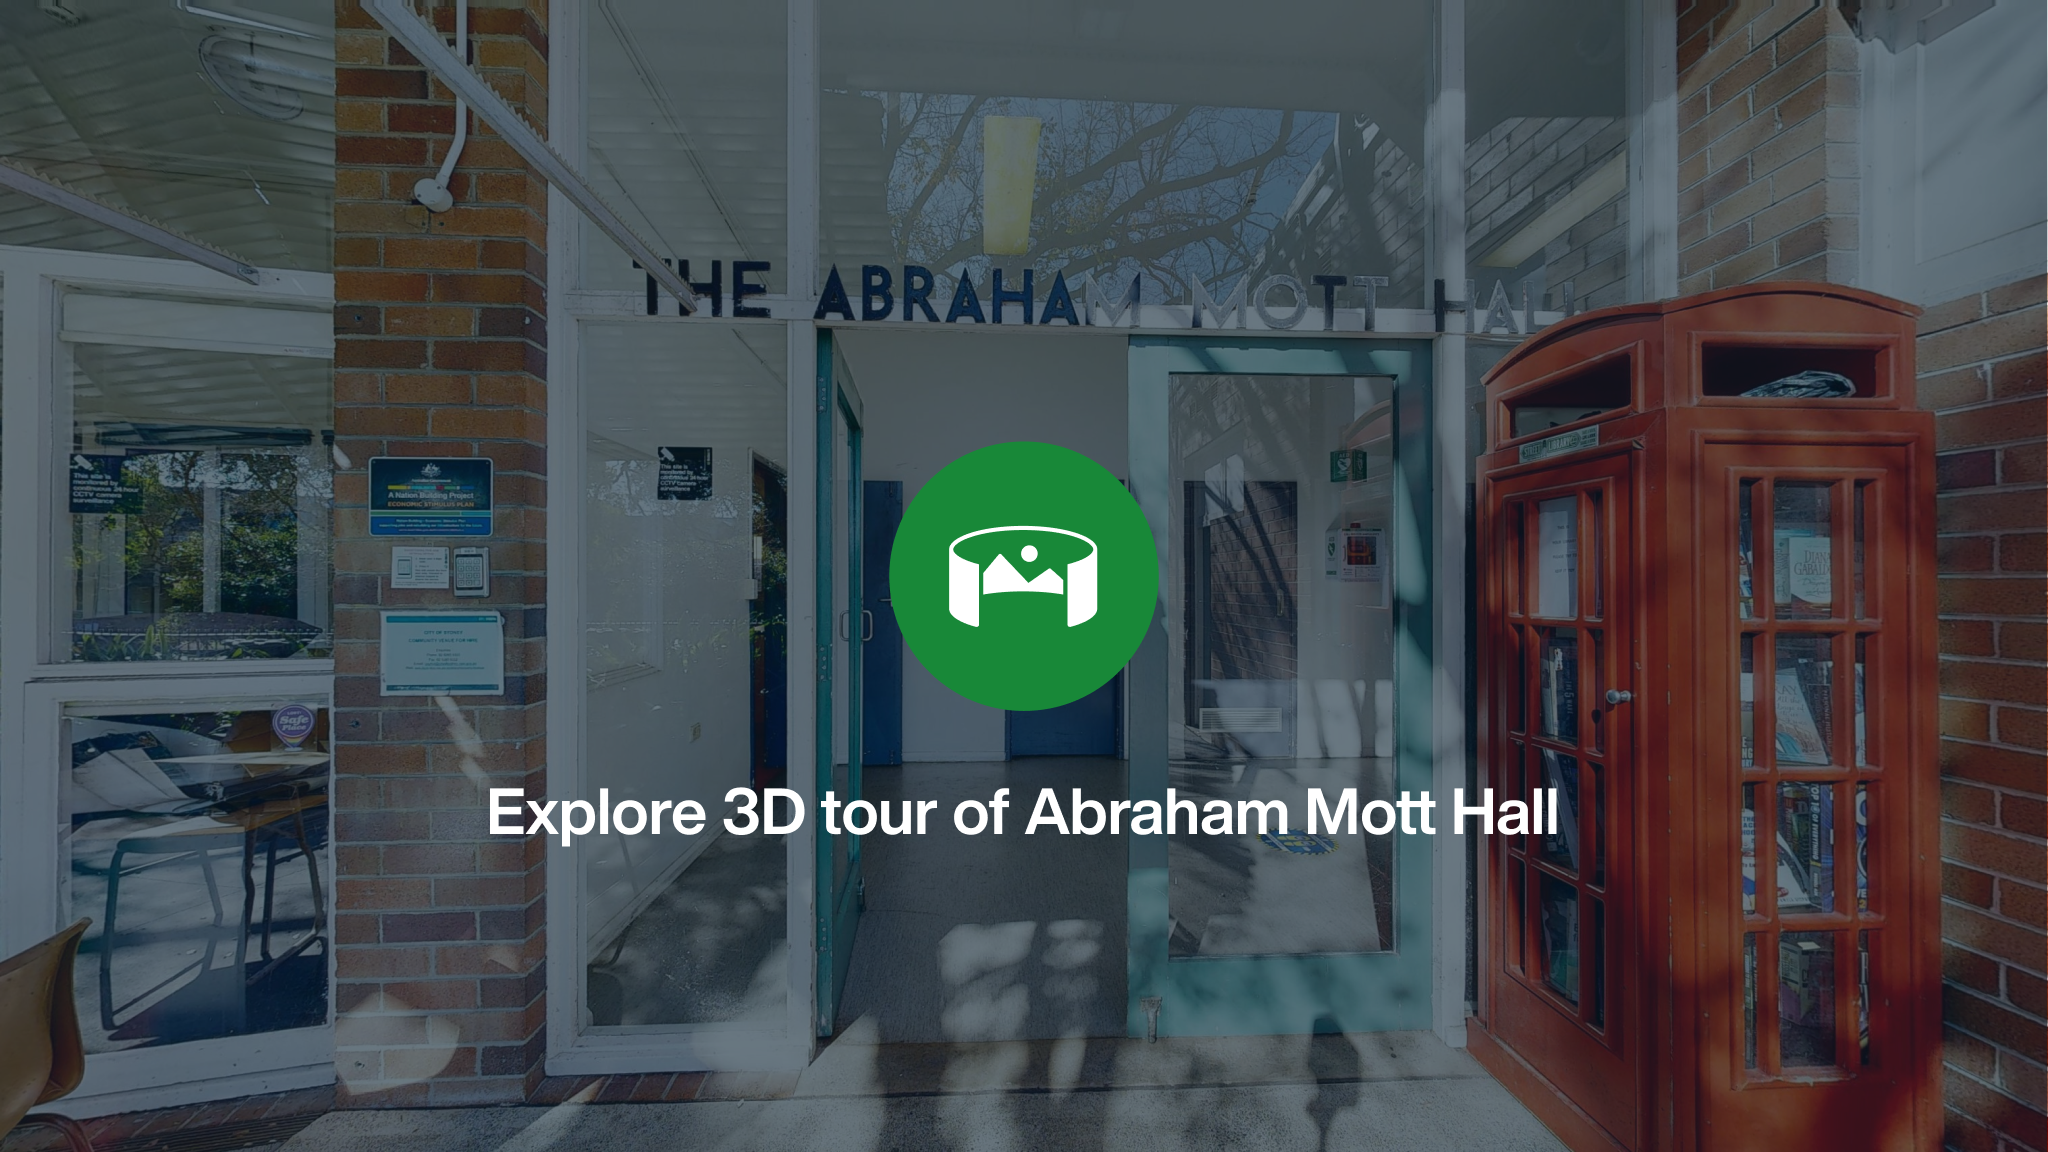 The front entrance to Abraham Mott Hall overlayed with a green icon and the words Explore 3D tour of Abraham Mott Hall.